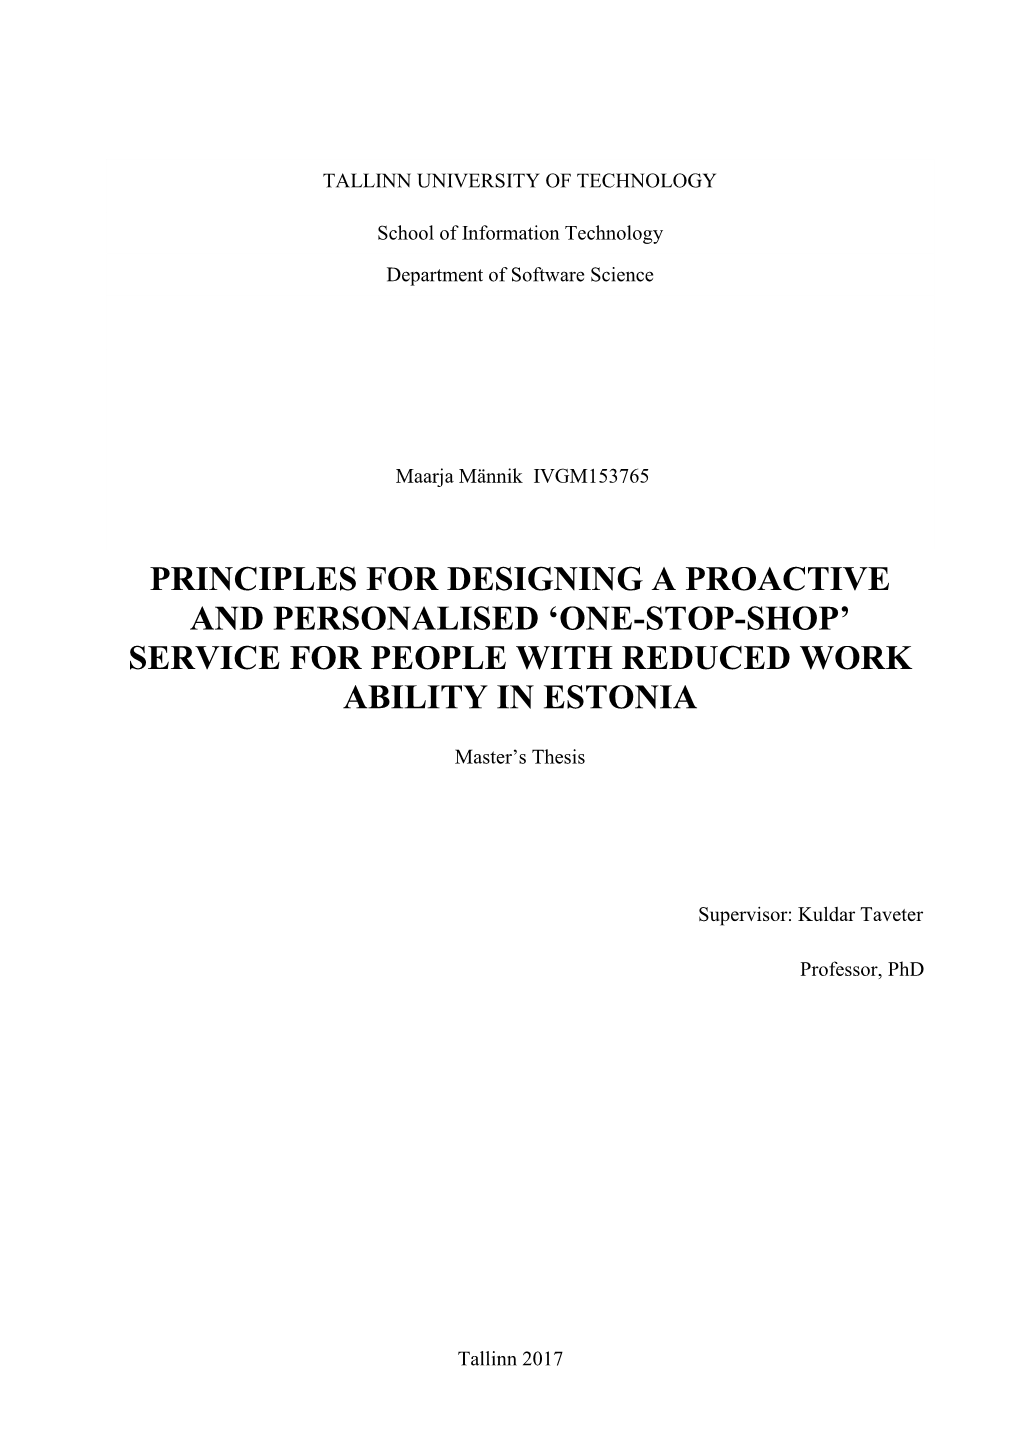 One-Stop-Shop’ Service for People with Reduced Work Ability in Estonia